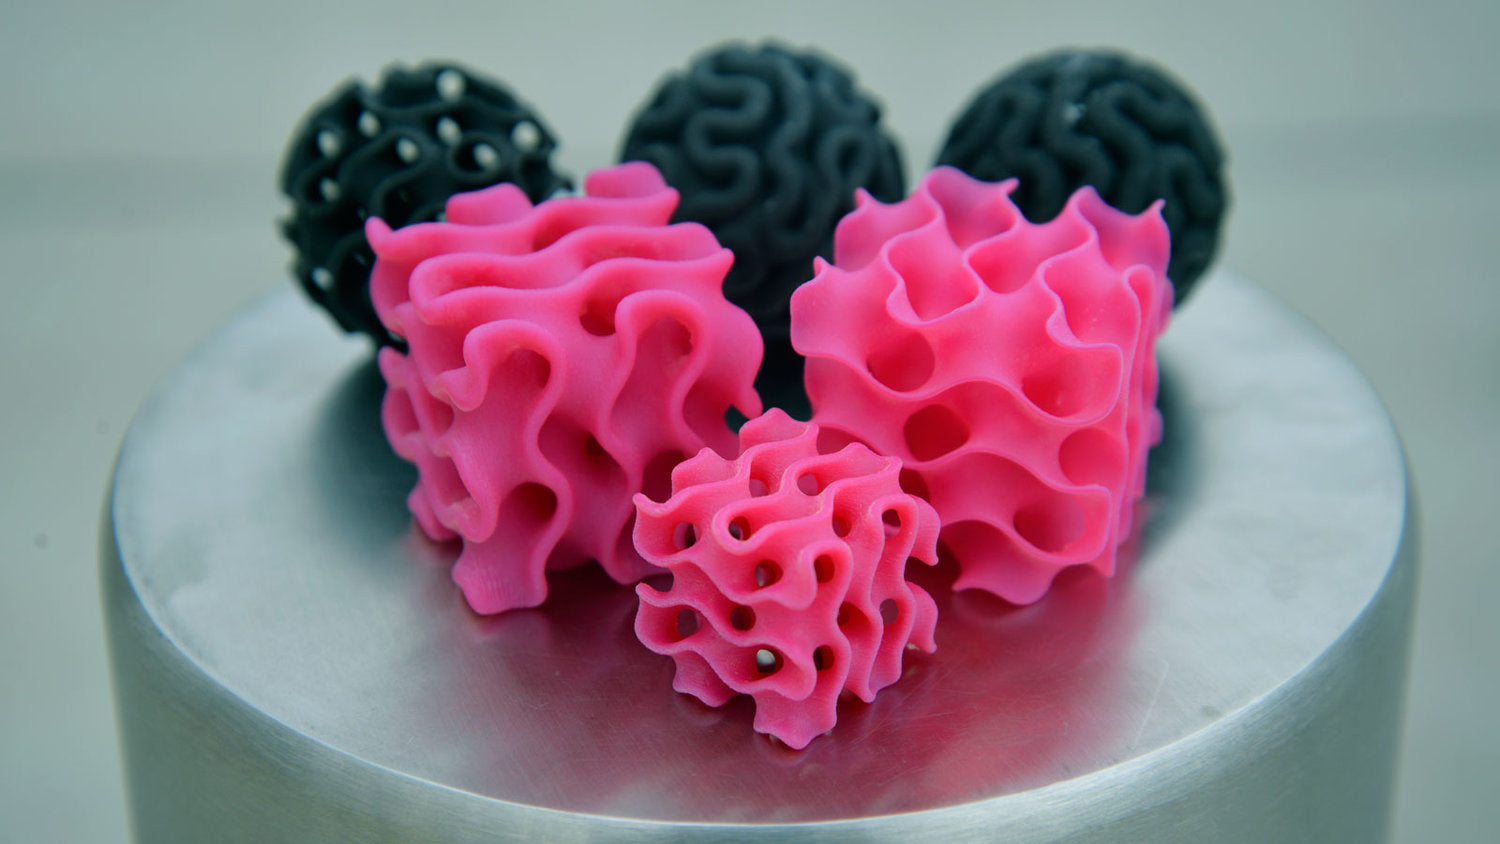 Pink and grey spheres and cubes printed with the gyroid pattern